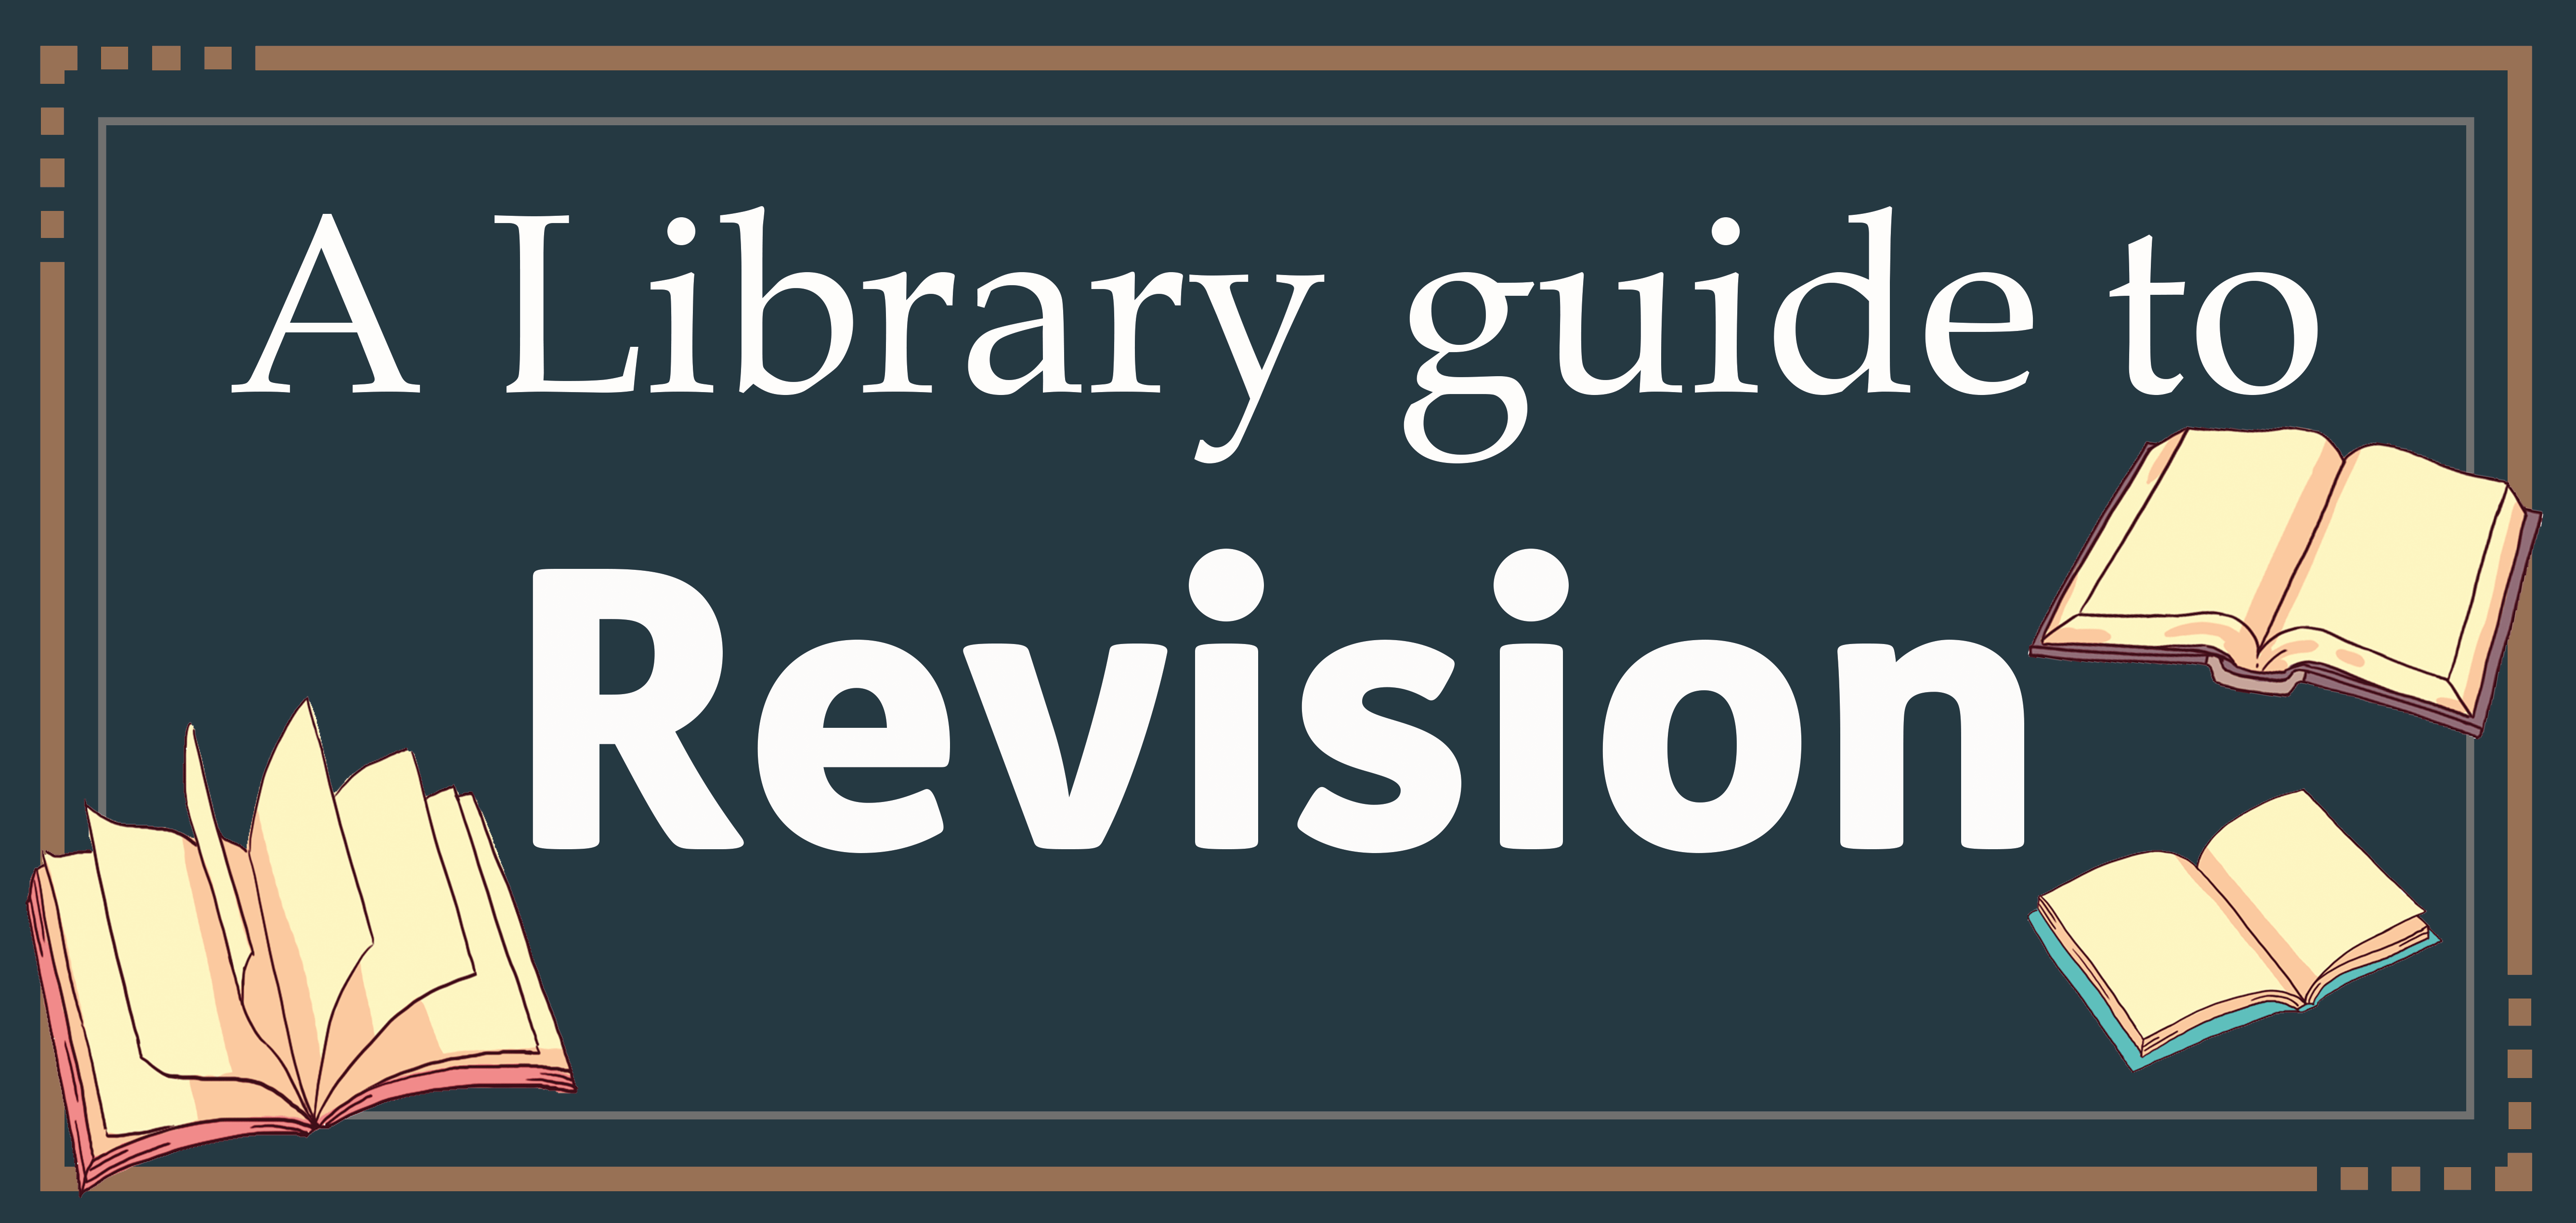 A library guide to revision